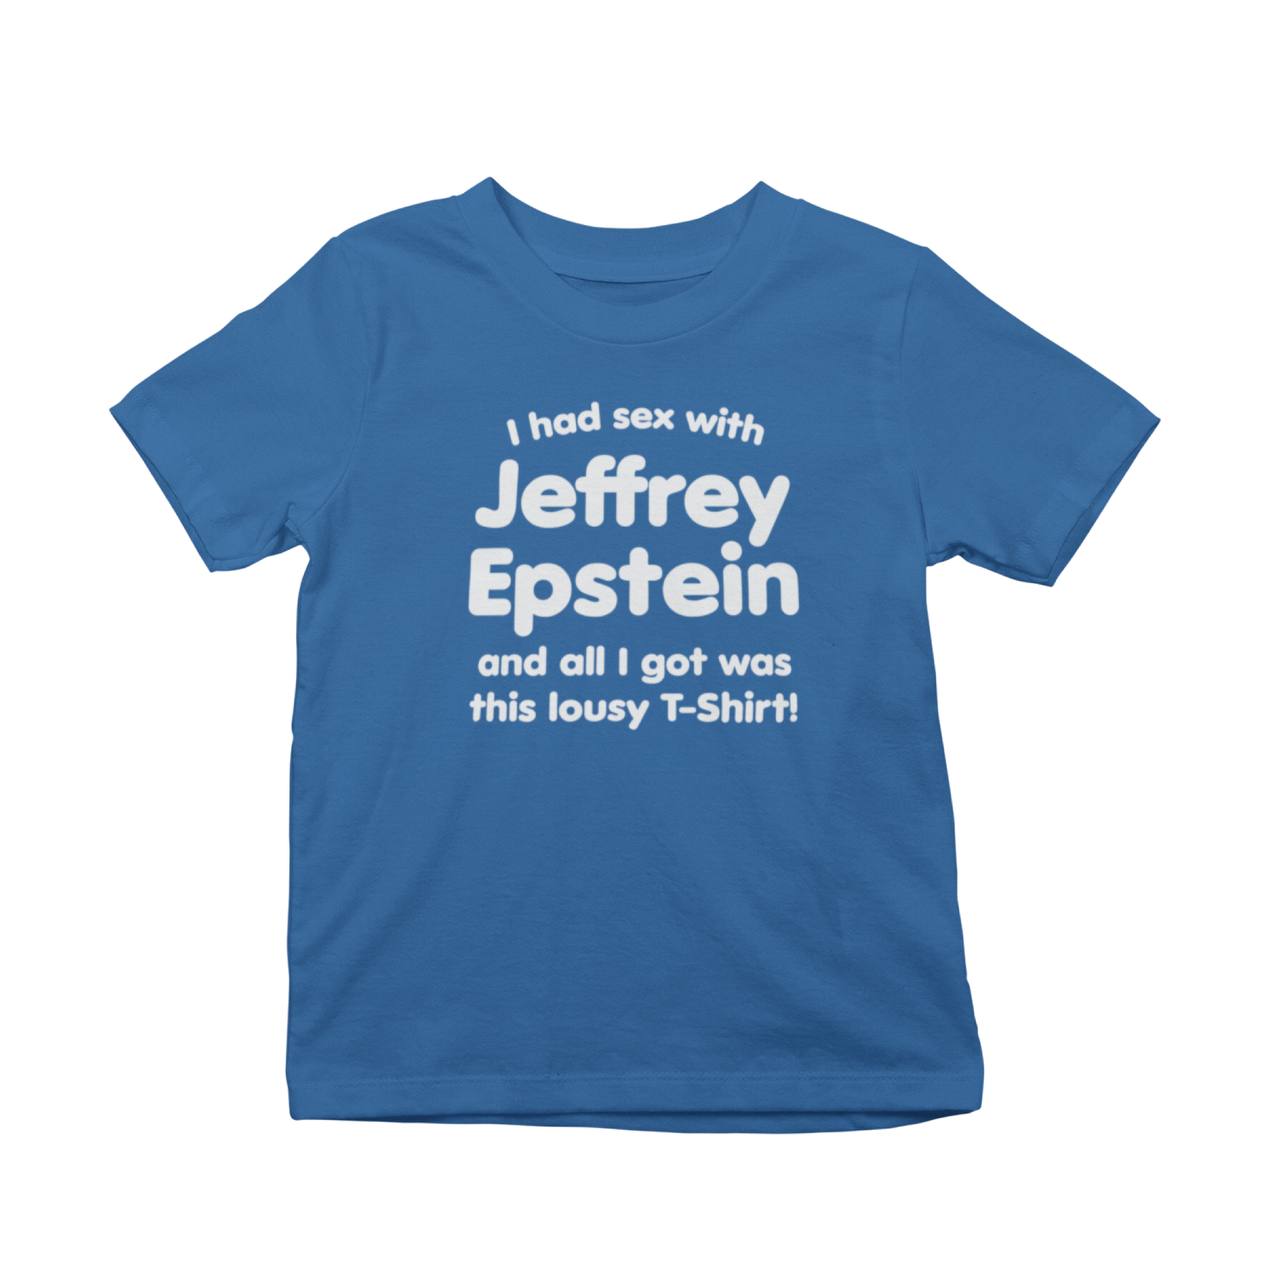 I Had Sex With Jeffery Epstein And All I Got Was This Lousy T-Shirt!